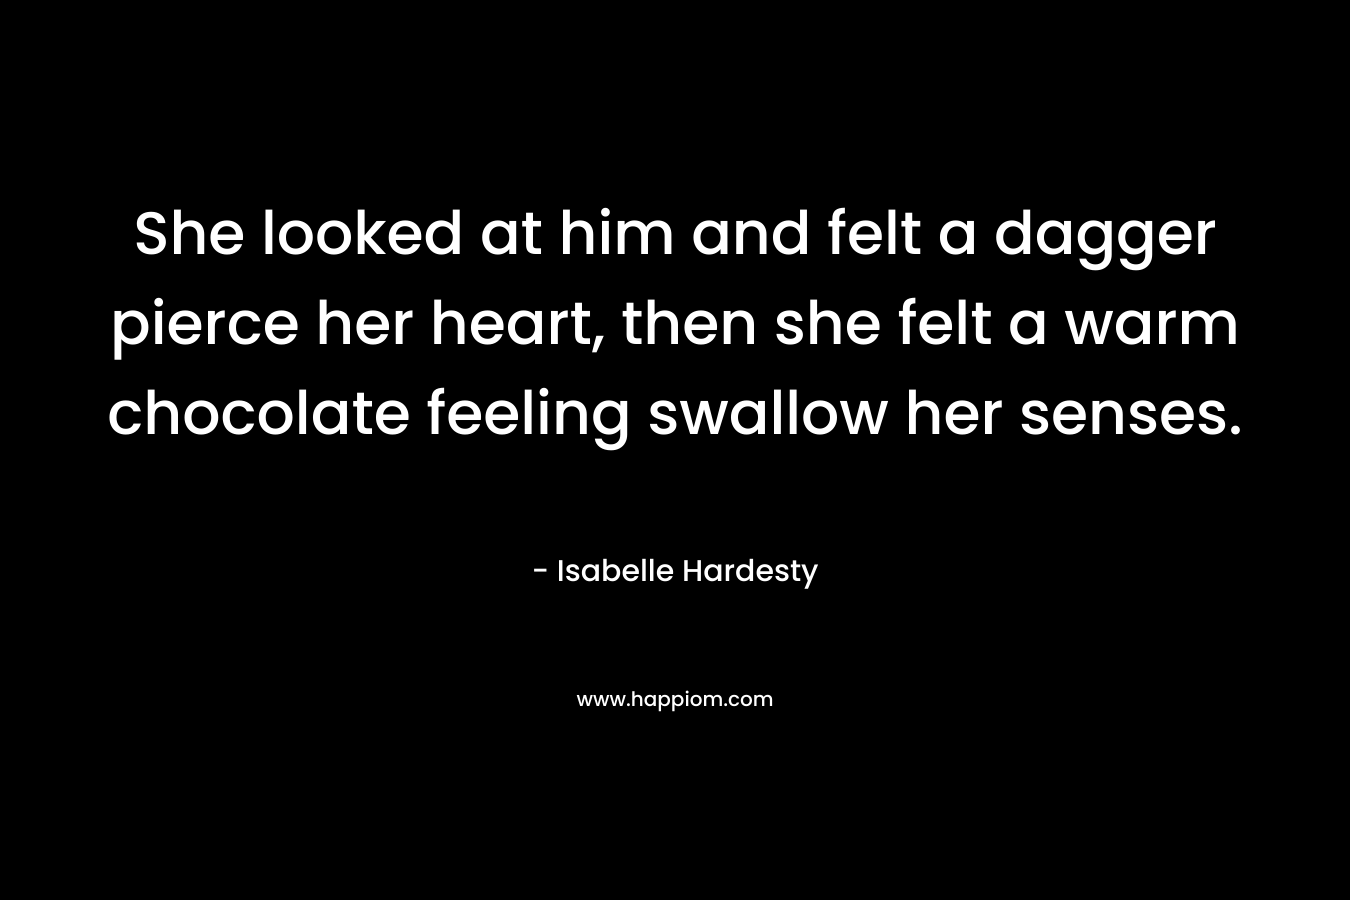 She looked at him and felt a dagger pierce her heart, then she felt a warm chocolate feeling swallow her senses. – Isabelle Hardesty